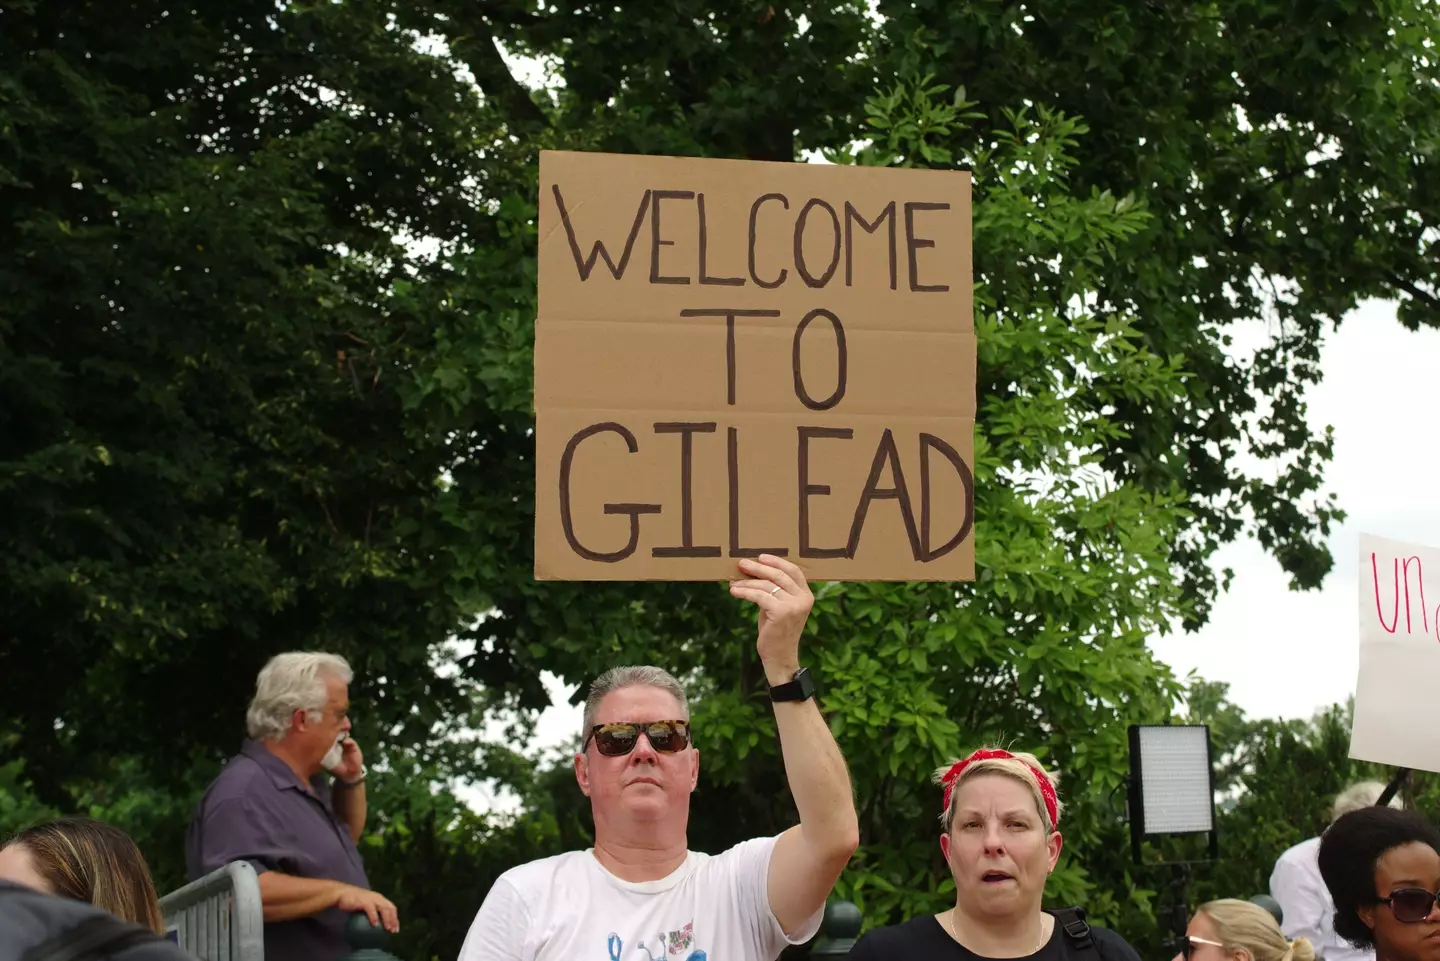 The rolling back of women's rights has prompted comparisons between the USA and Gilead.